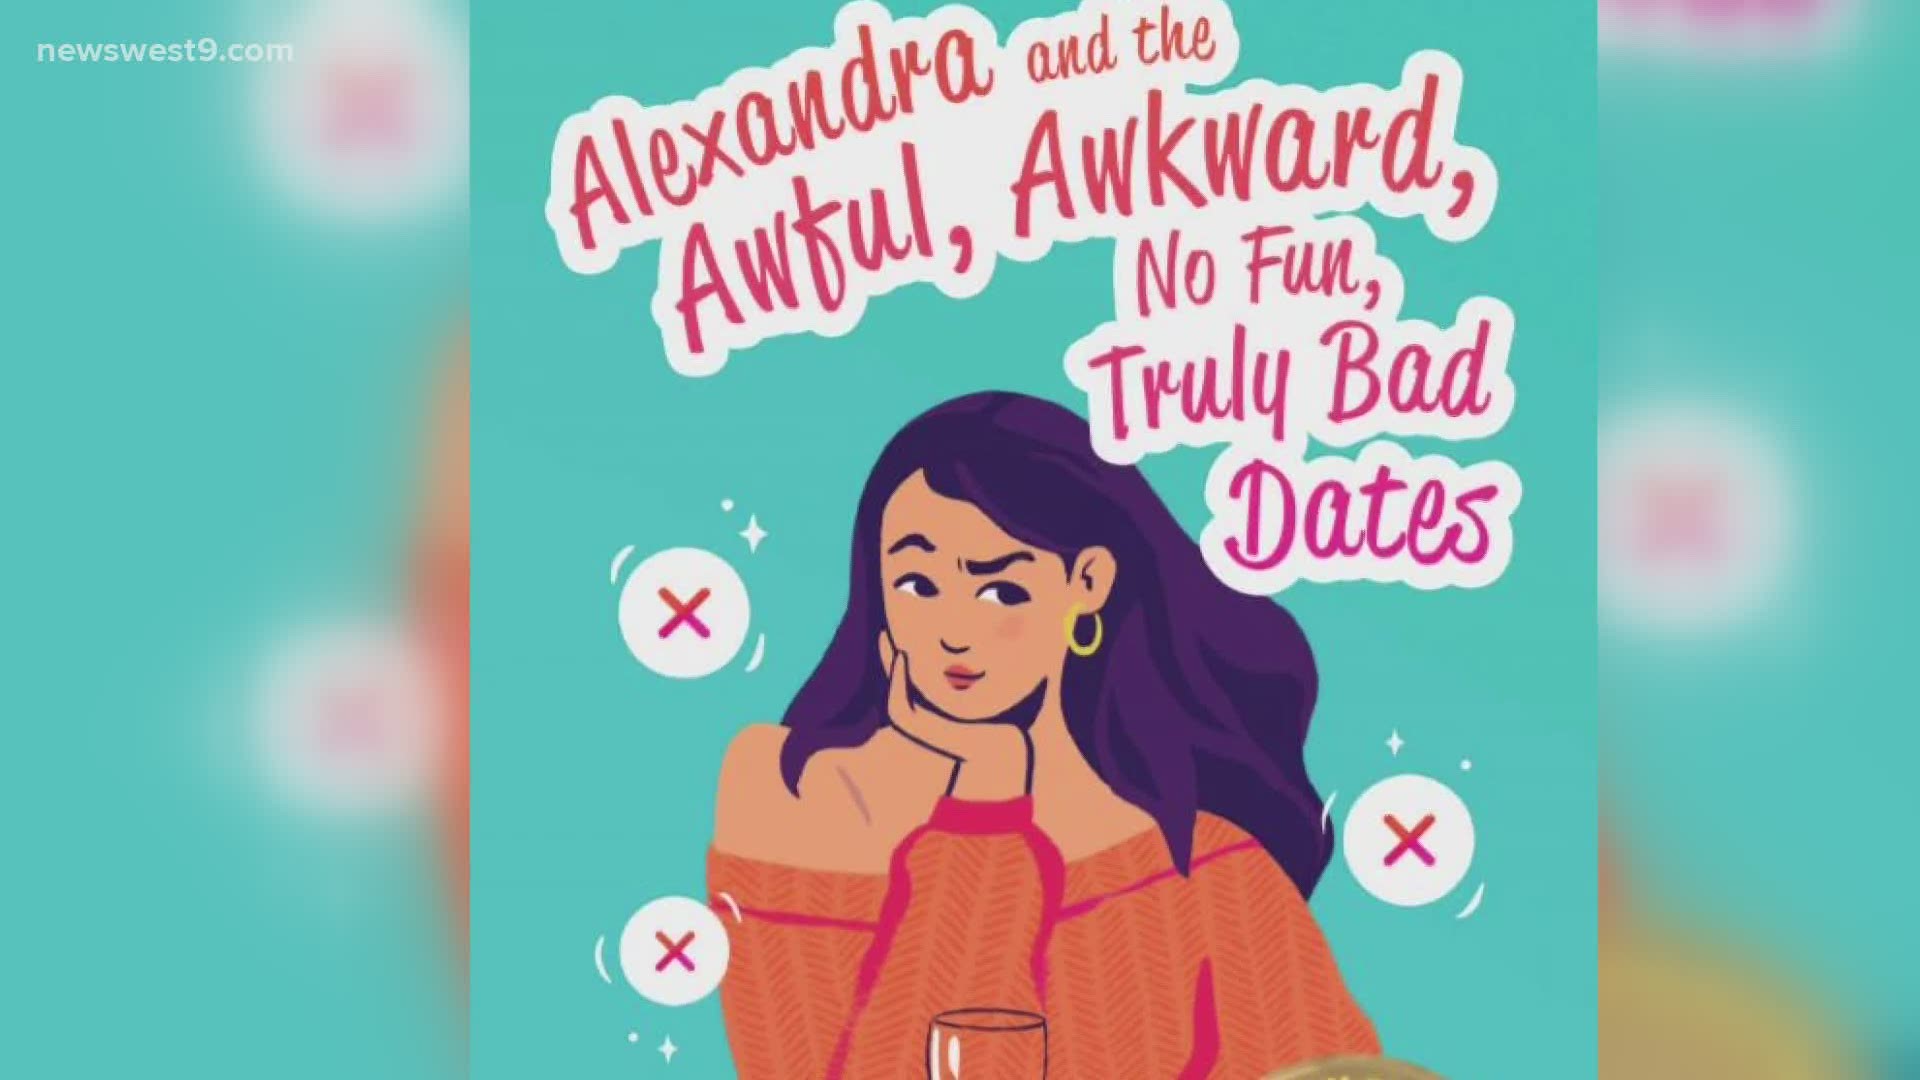 Author Rebekah Manley transforms her journey of dating into a picture book for kids and adults called "Alexandra and the Awful, Awkward, Not Fun, Truly Bad Dates"